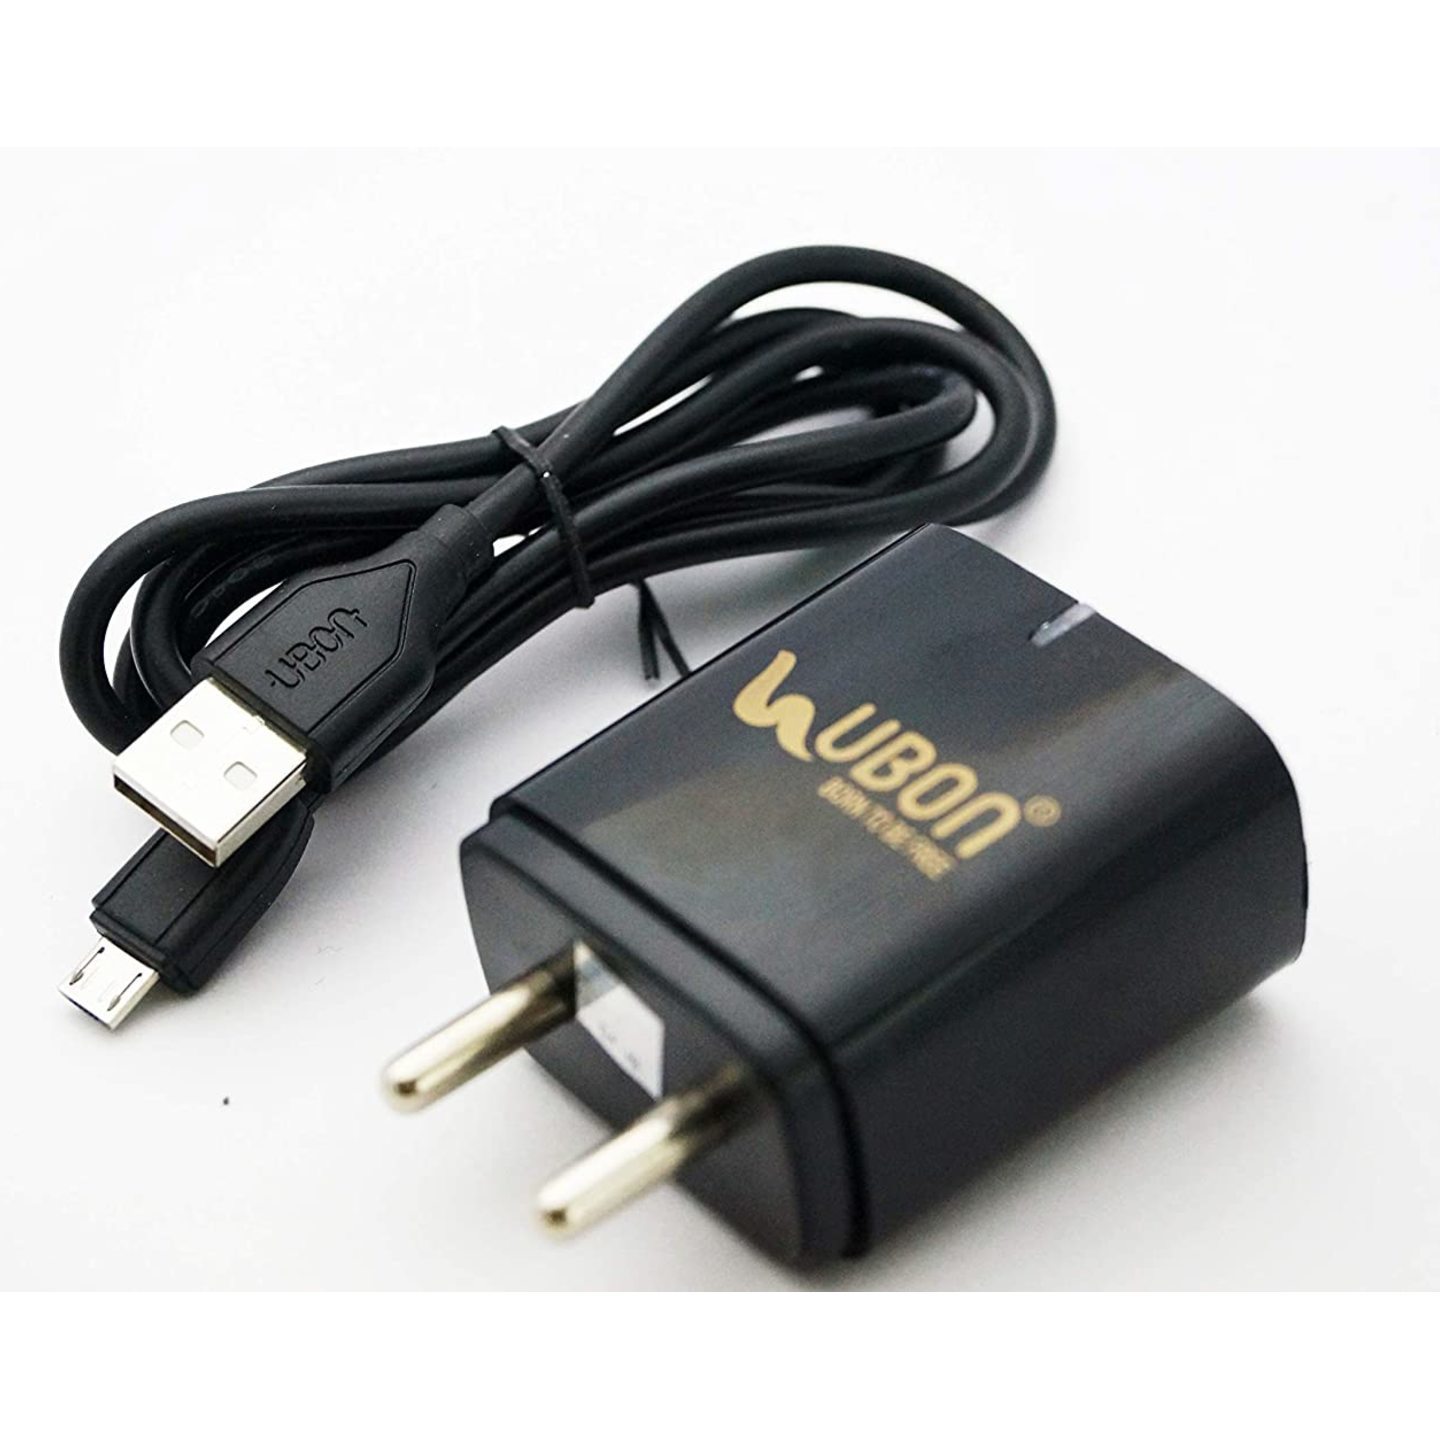 Ubon CH 586 Micro USB charger with 2 Ports